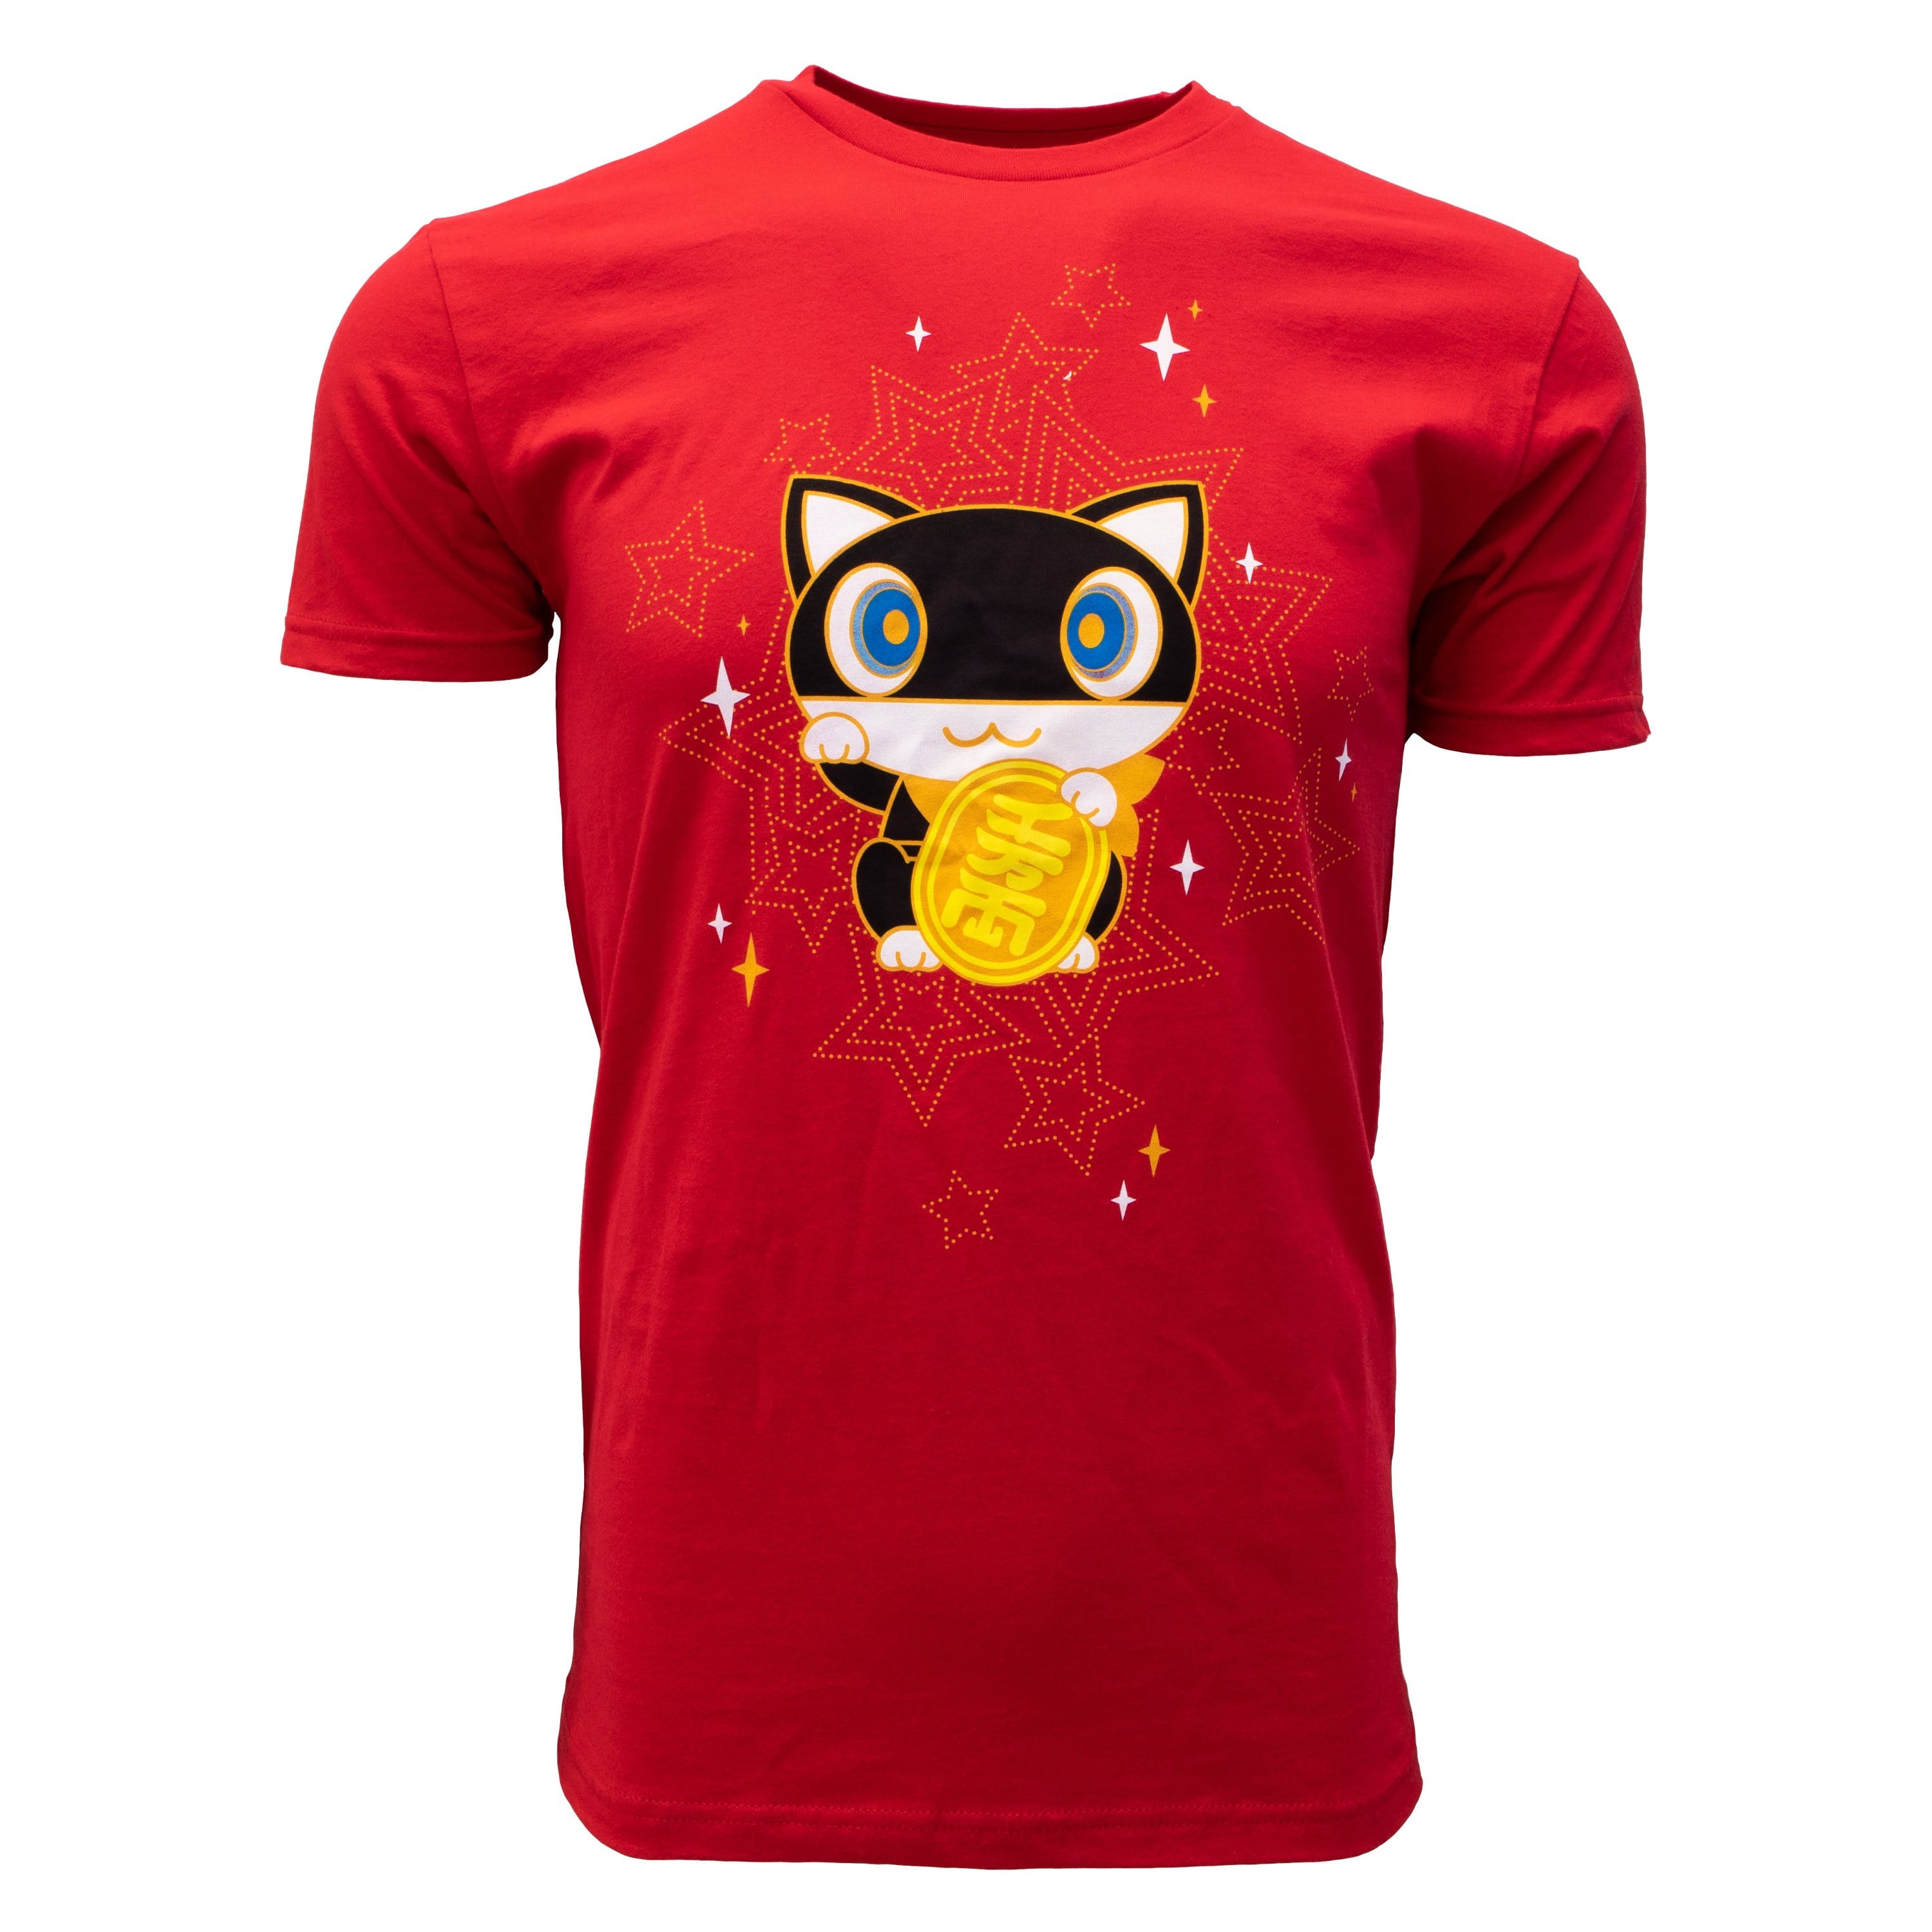 Persona 5 - Morgana Lucky Cat Tee - Red